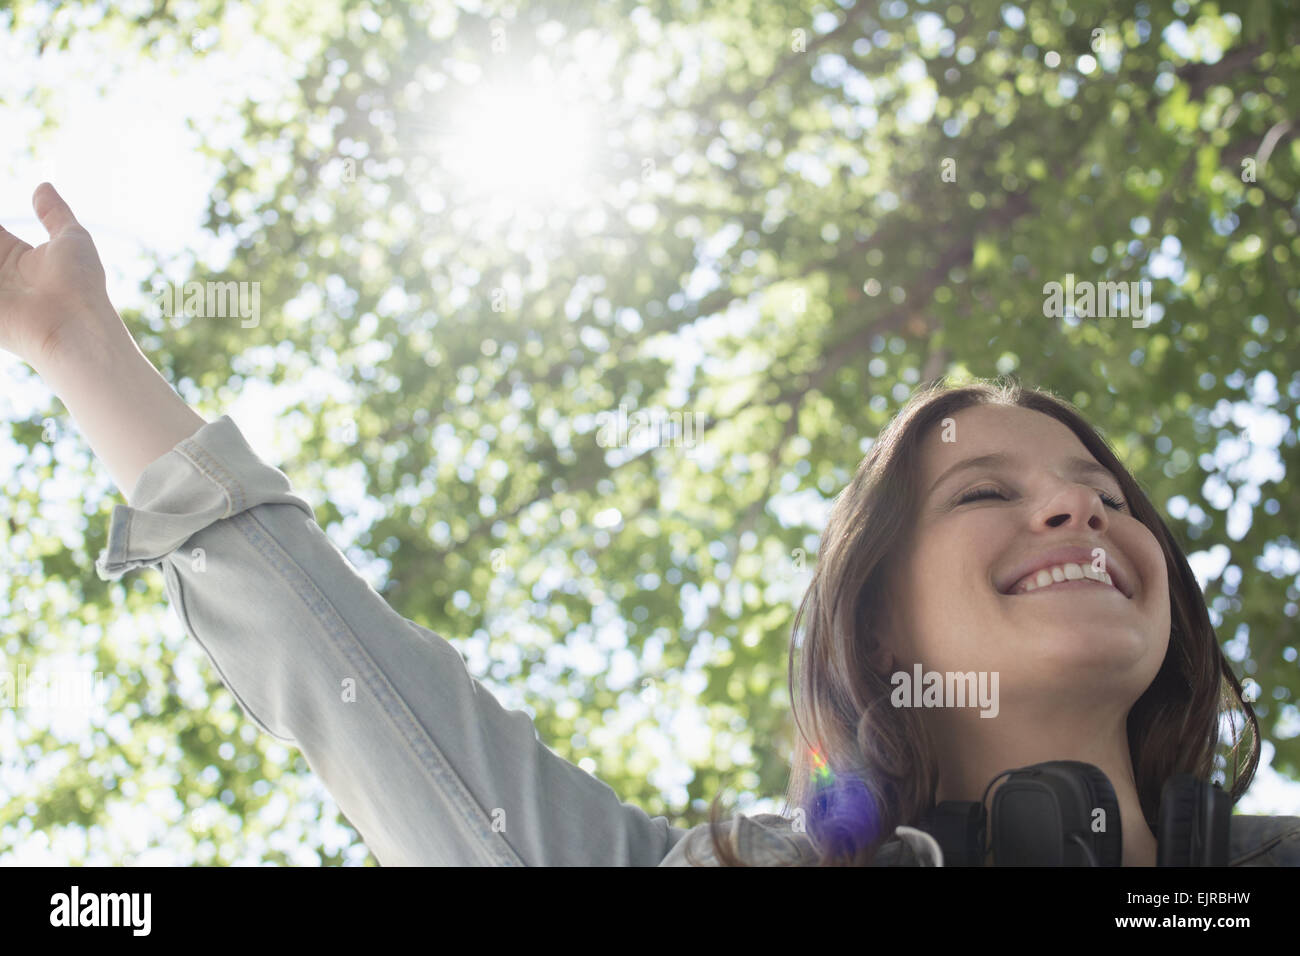 Low angle view of Caucasian woman cheering outdoors Stock Photo